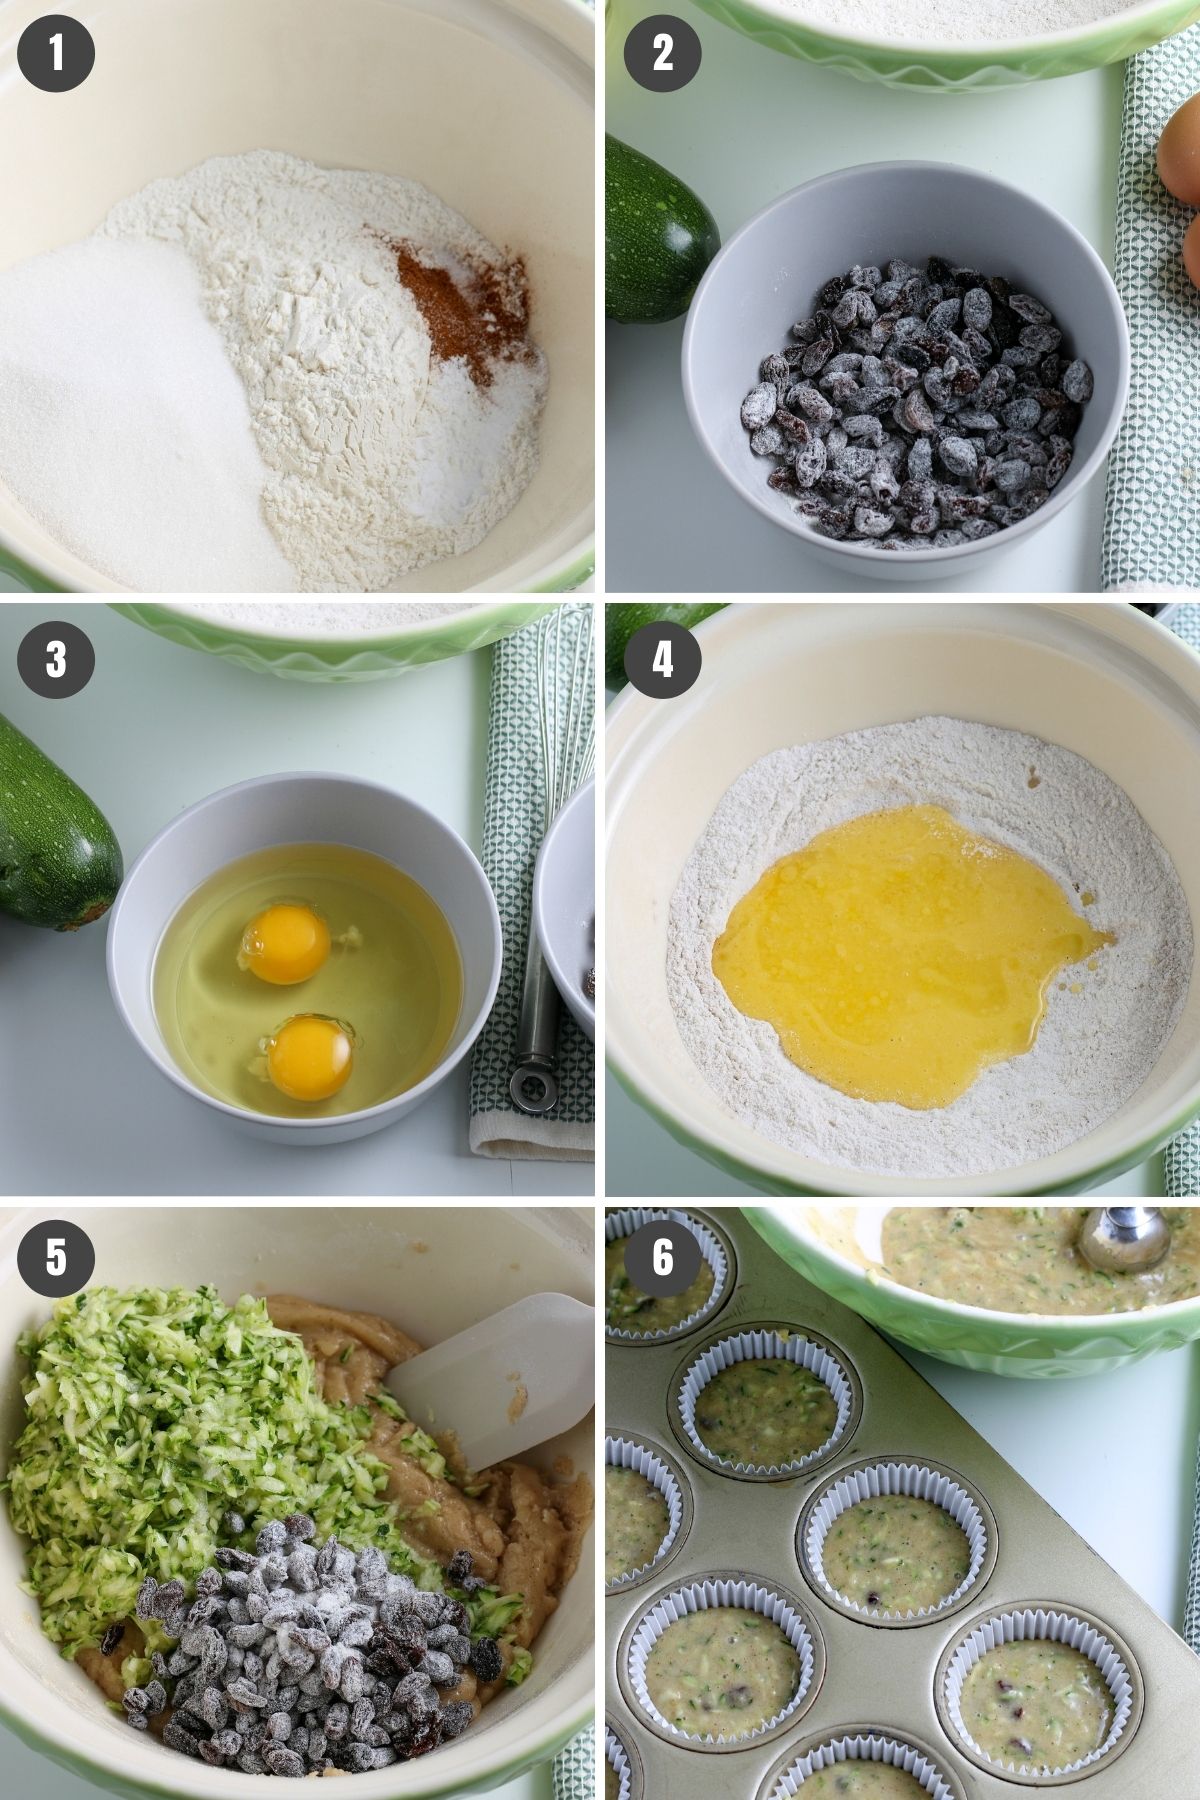 steps for how to make gluten-free dairy-free zucchini muffins by mixing and pouring into cupcake liners in a muffin tin